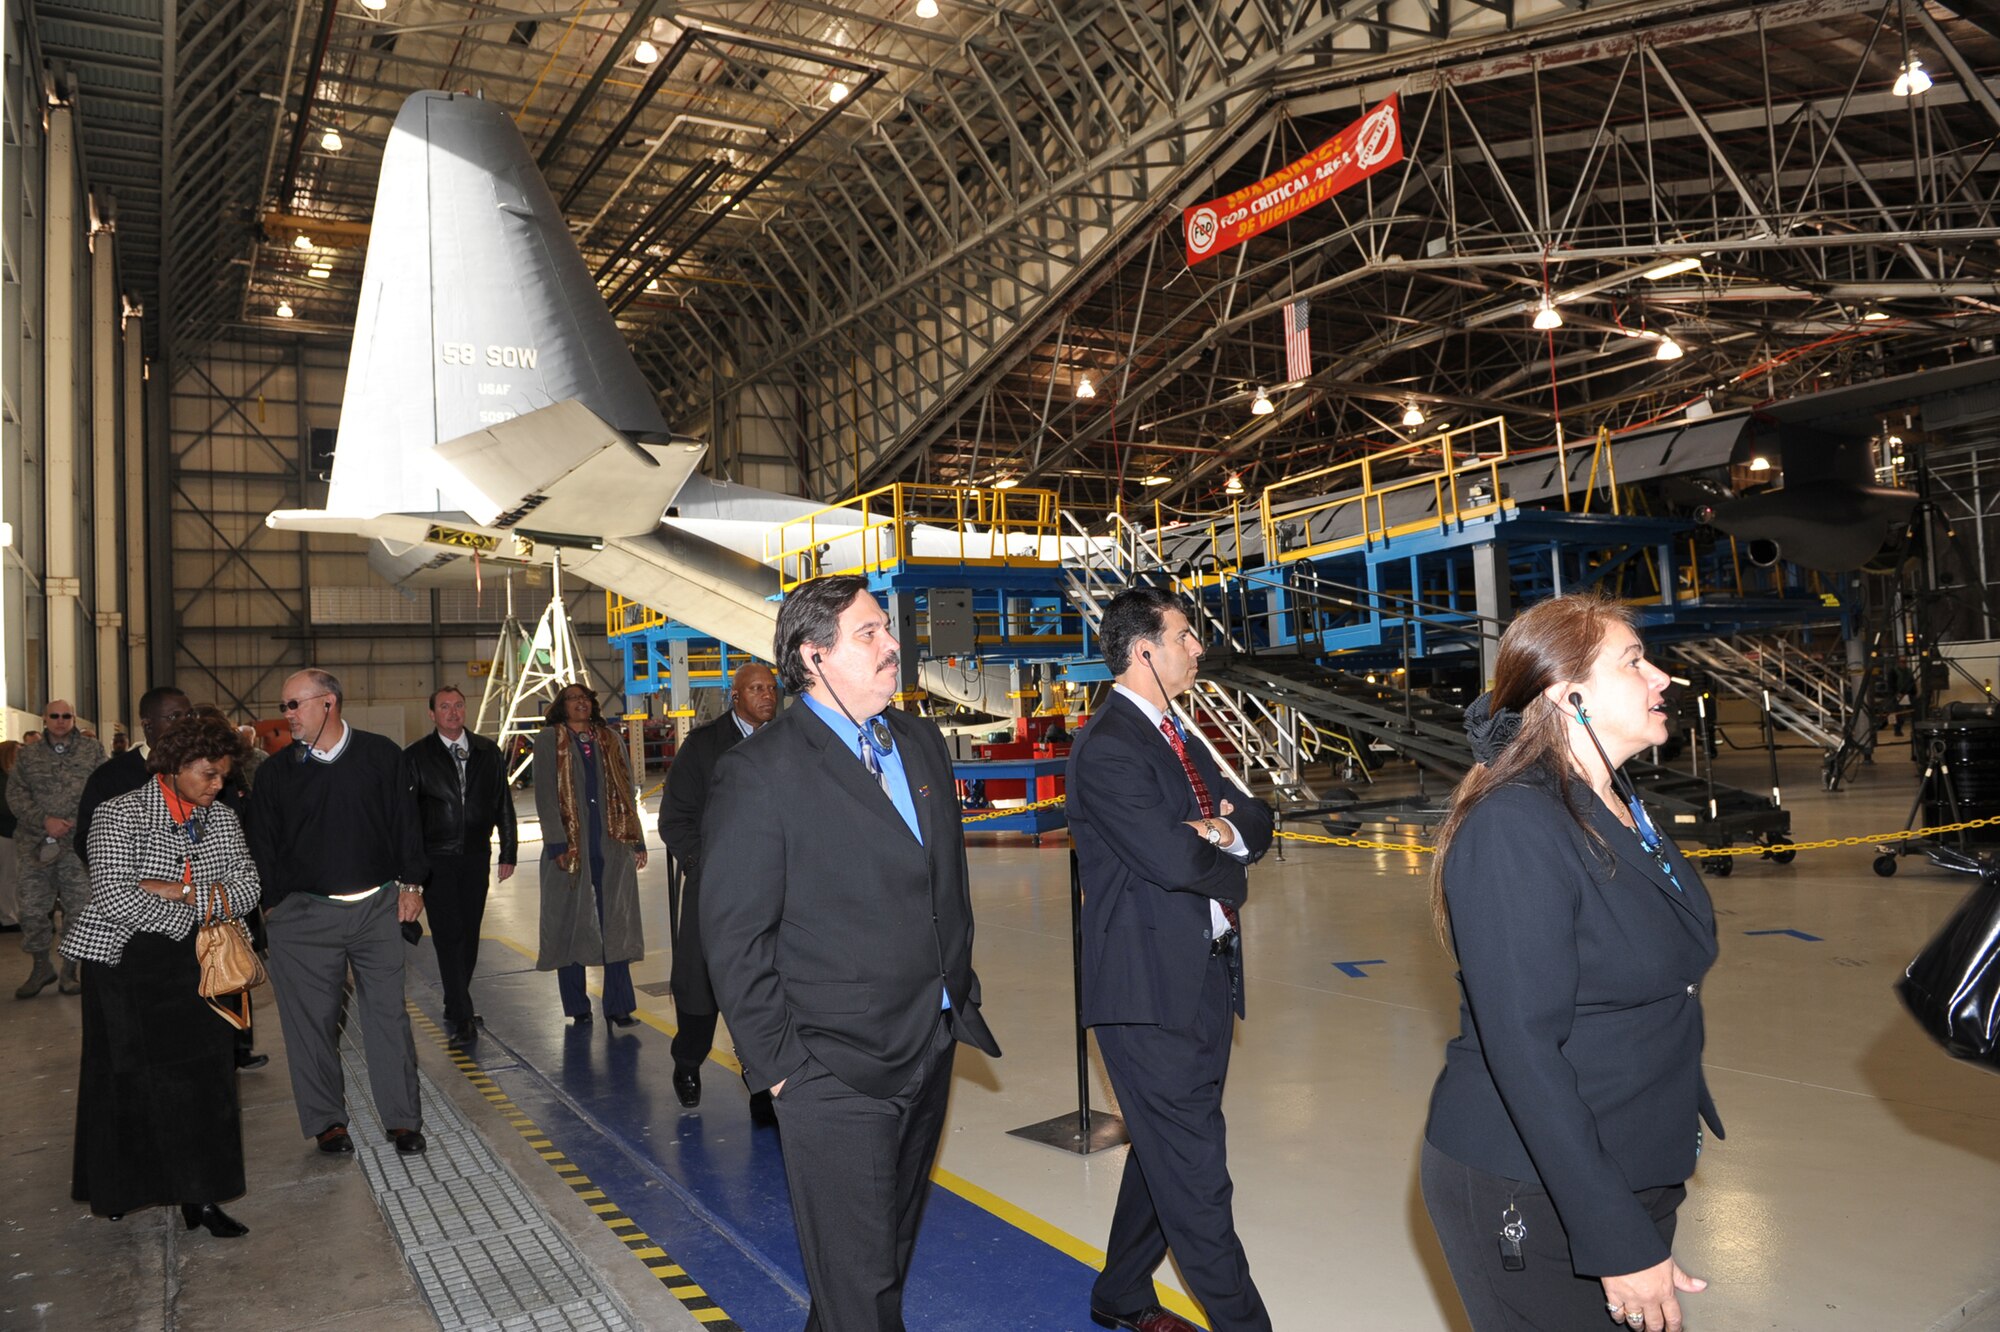 Community leaders from the 21st Century Partnership and the Warner Robins Chamber of Commerce tour the C-130 High Velocity Maintenance process facility. U. S. Air Force photo by Ray Crayton Jr